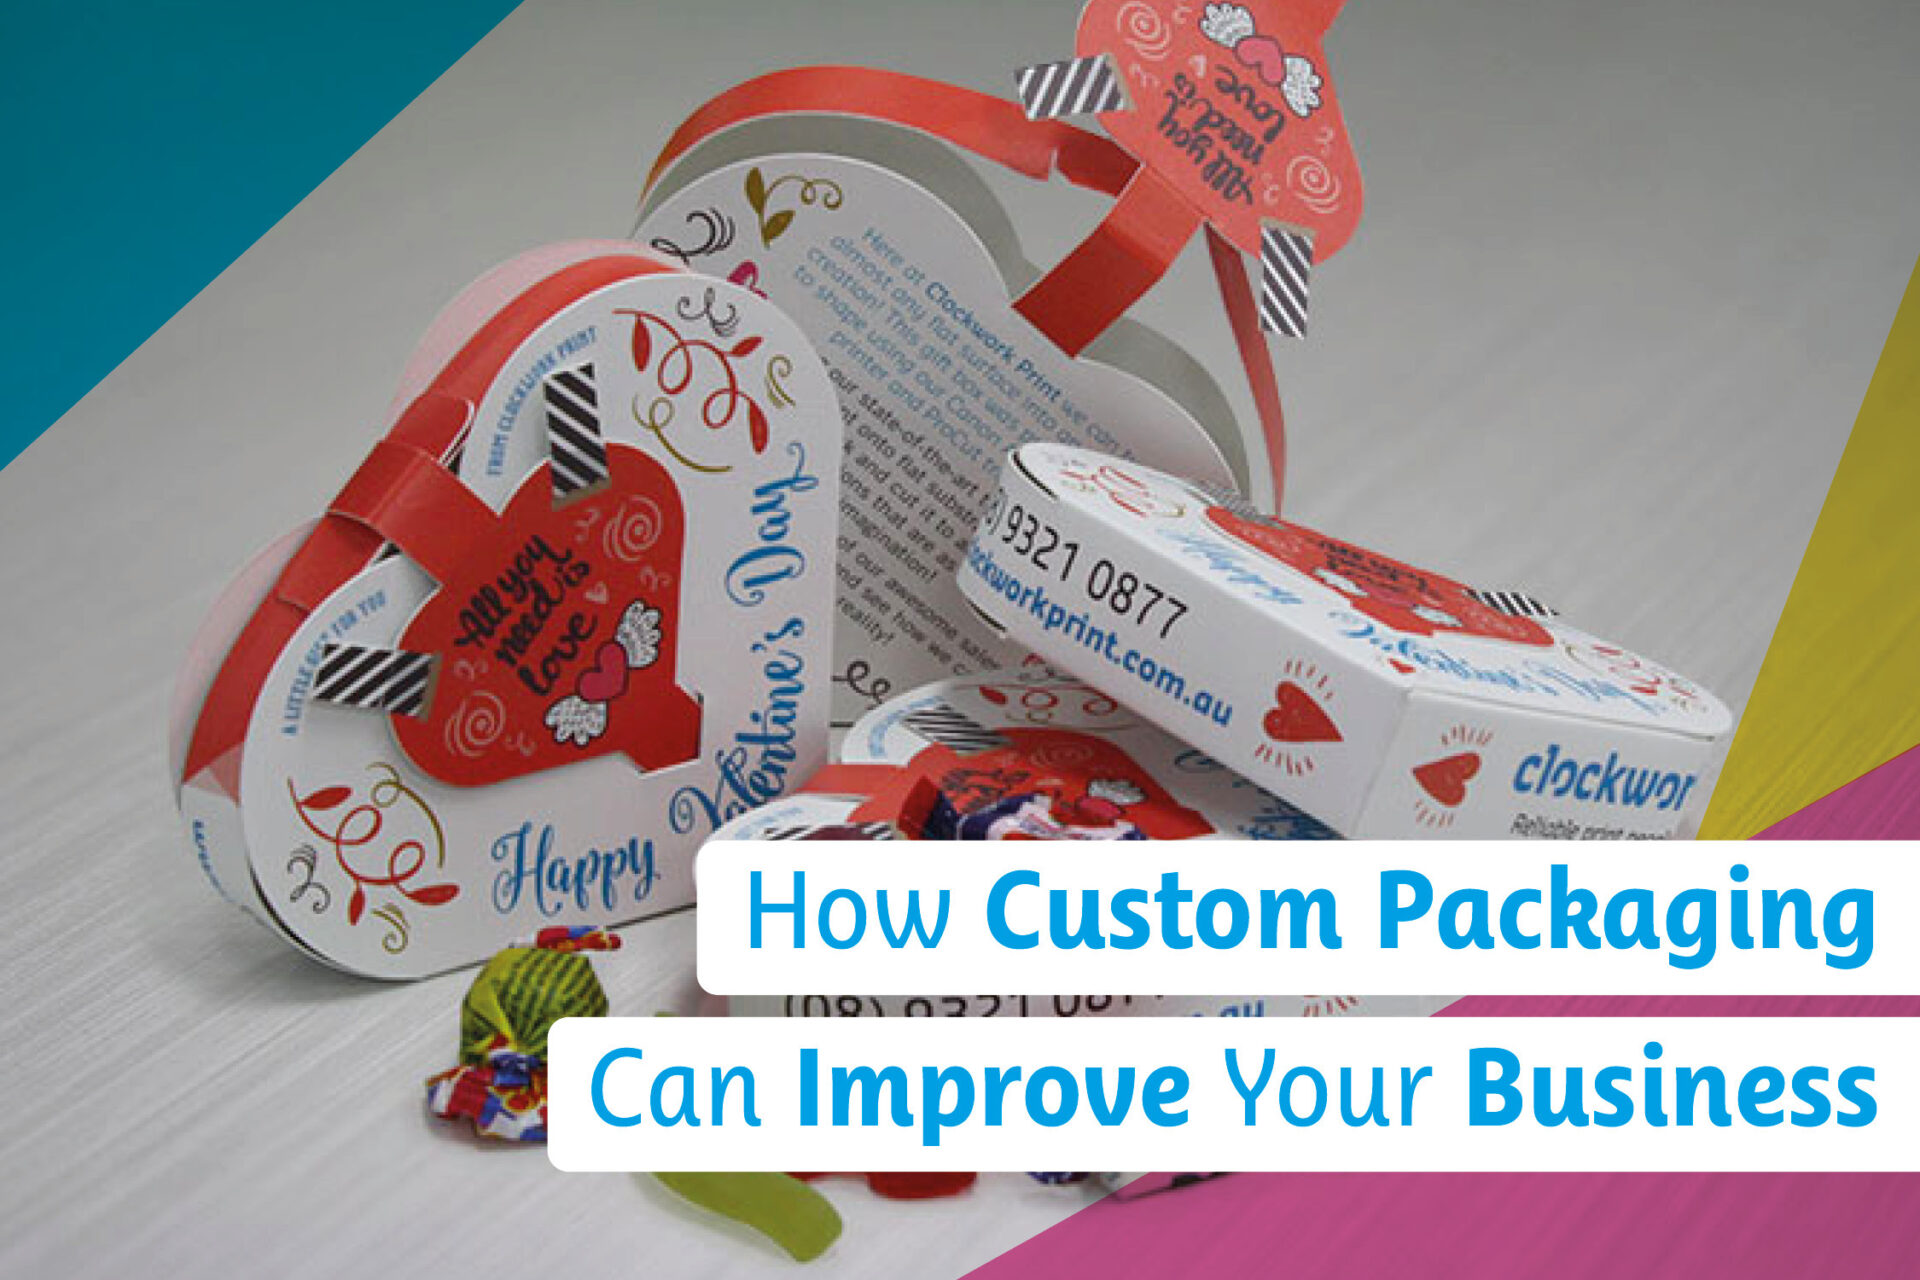 How Custom Packaging Can Improve Your Business